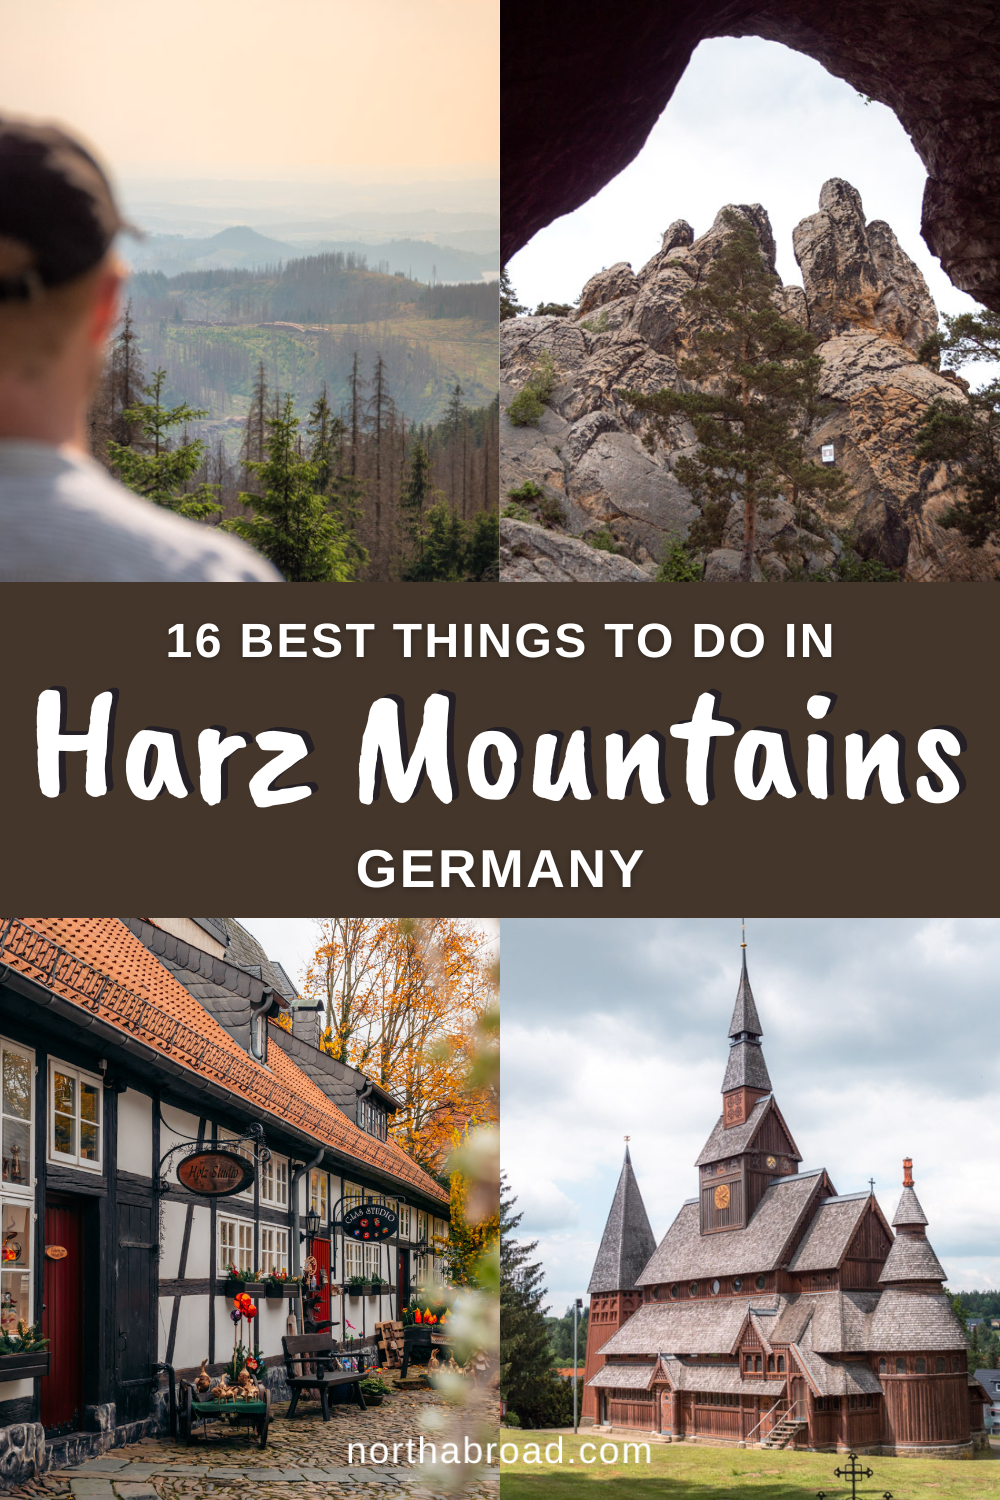 A Complete Travel Guide to the Harz Mountains in Germany: 16 Best Things to Do and See